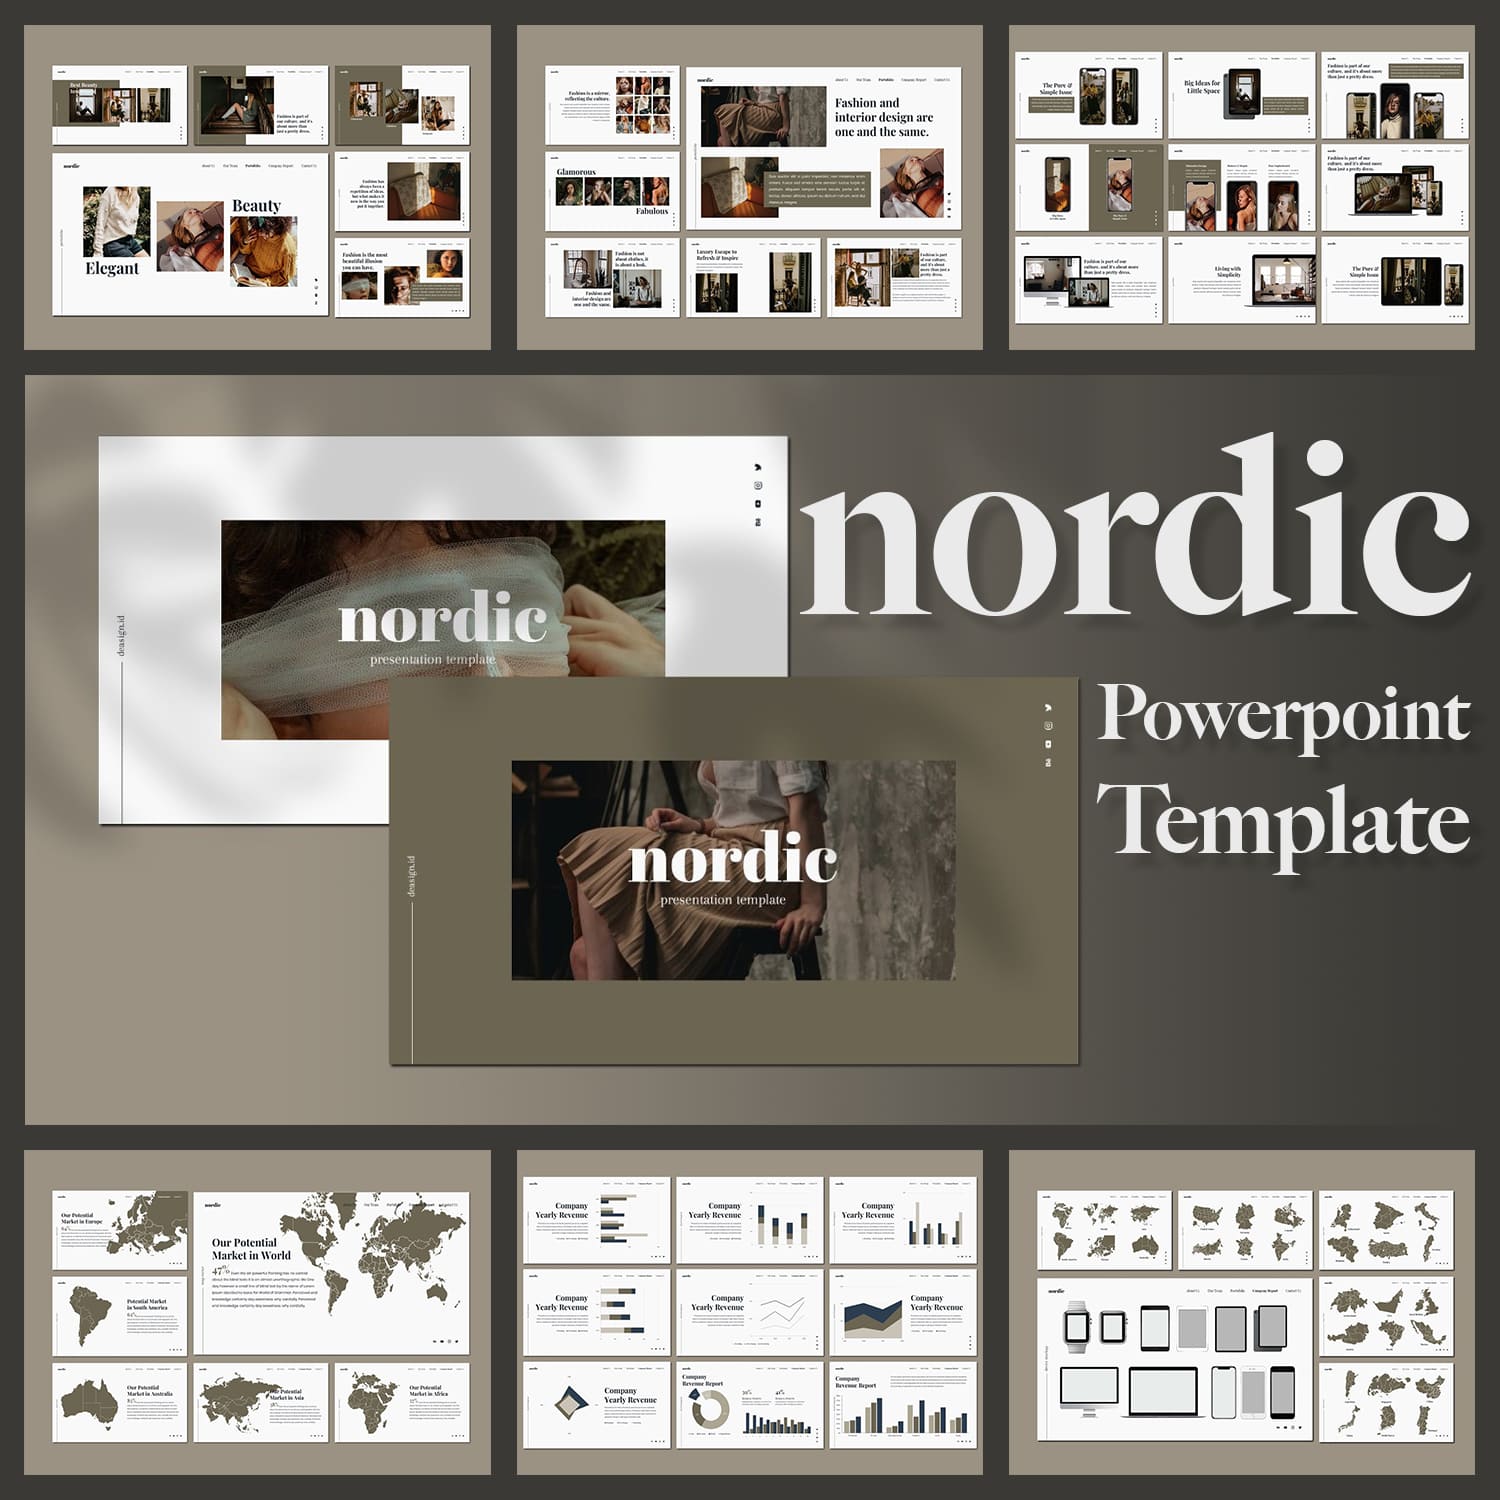 Nordic - Powerpoint Template.